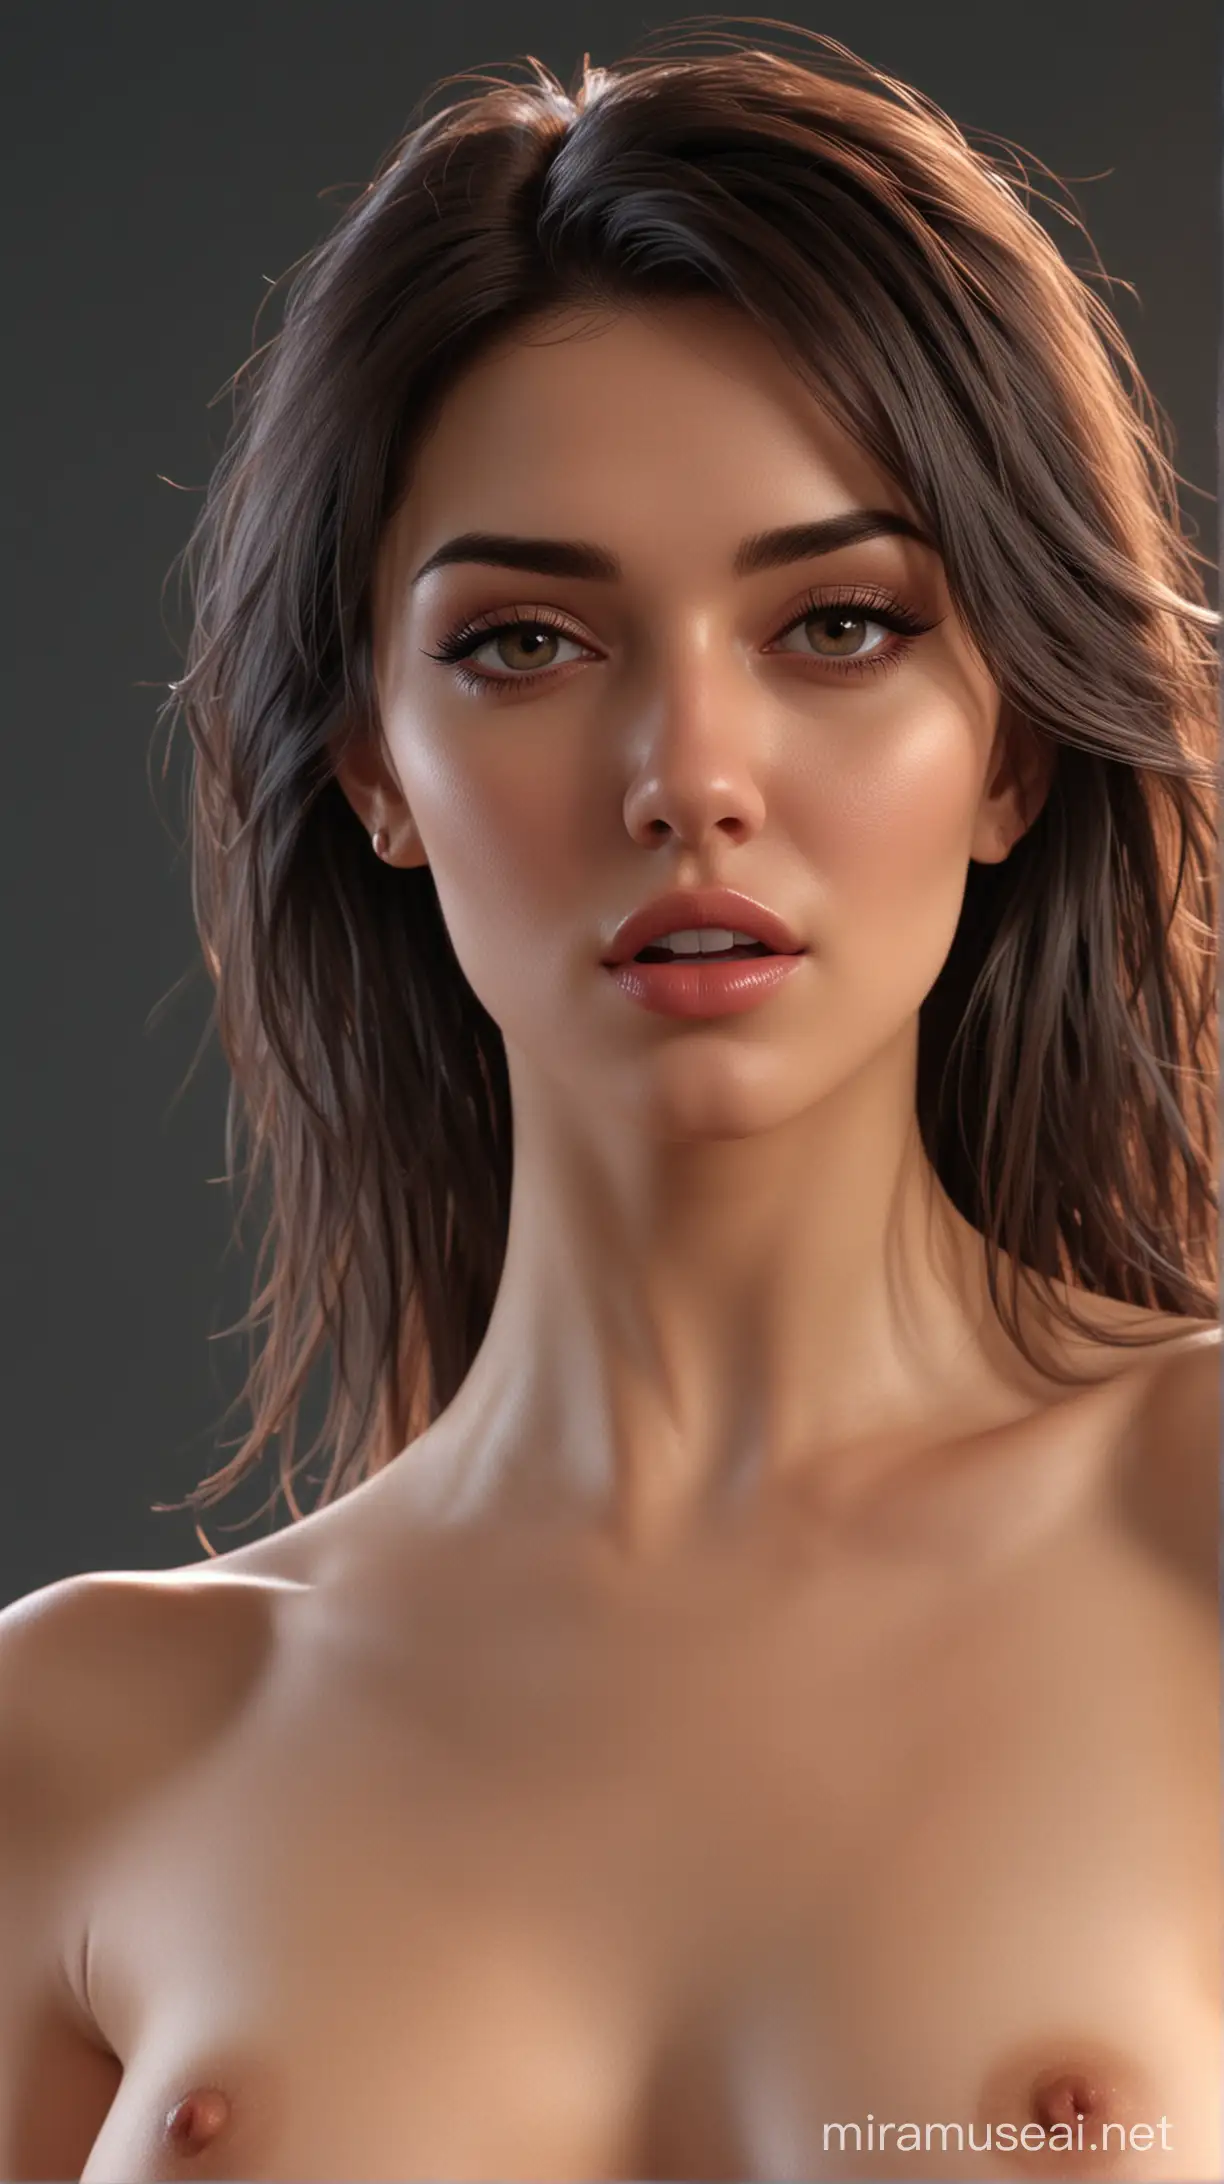 Passionate Woman Embracing Desire in Realism 3D Animation